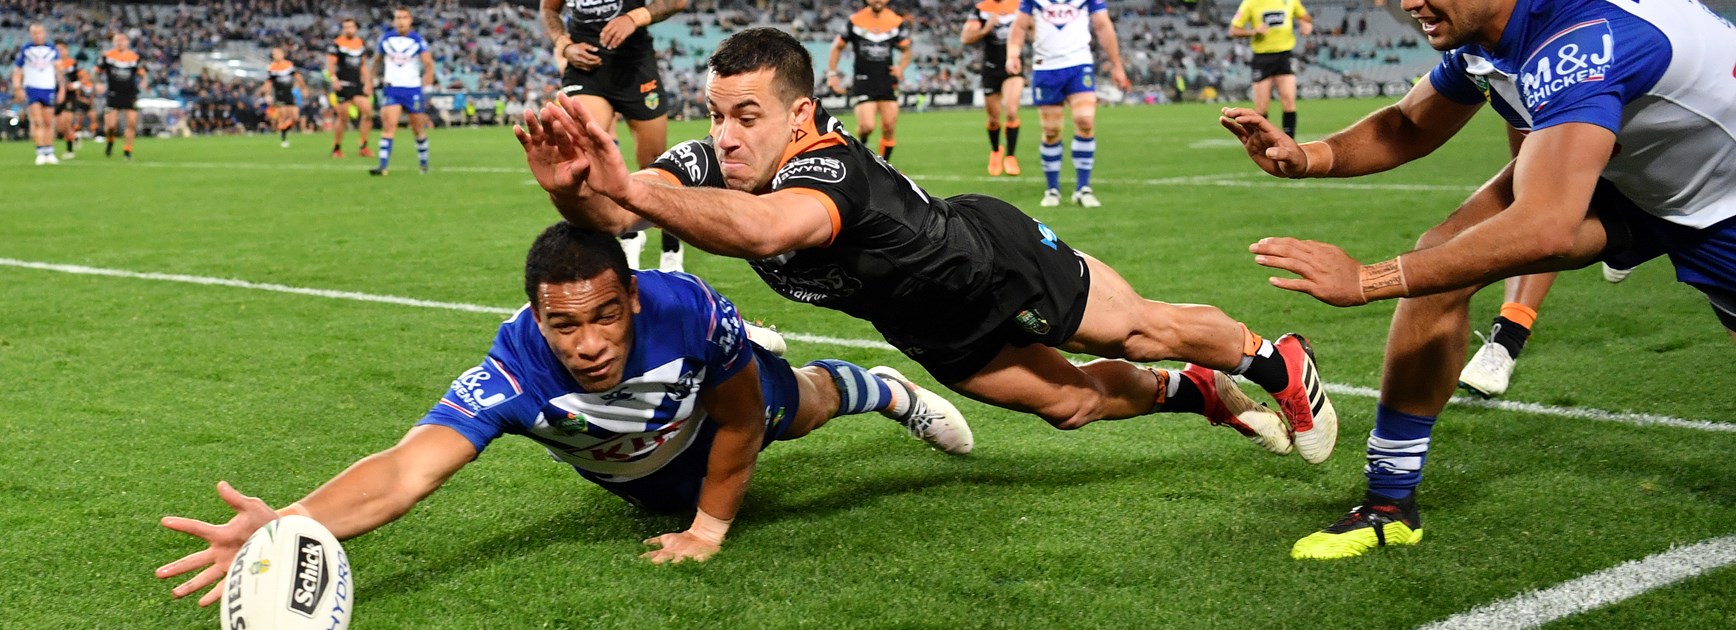 Will Hopoate keeps the ball away from Corey Thompson.